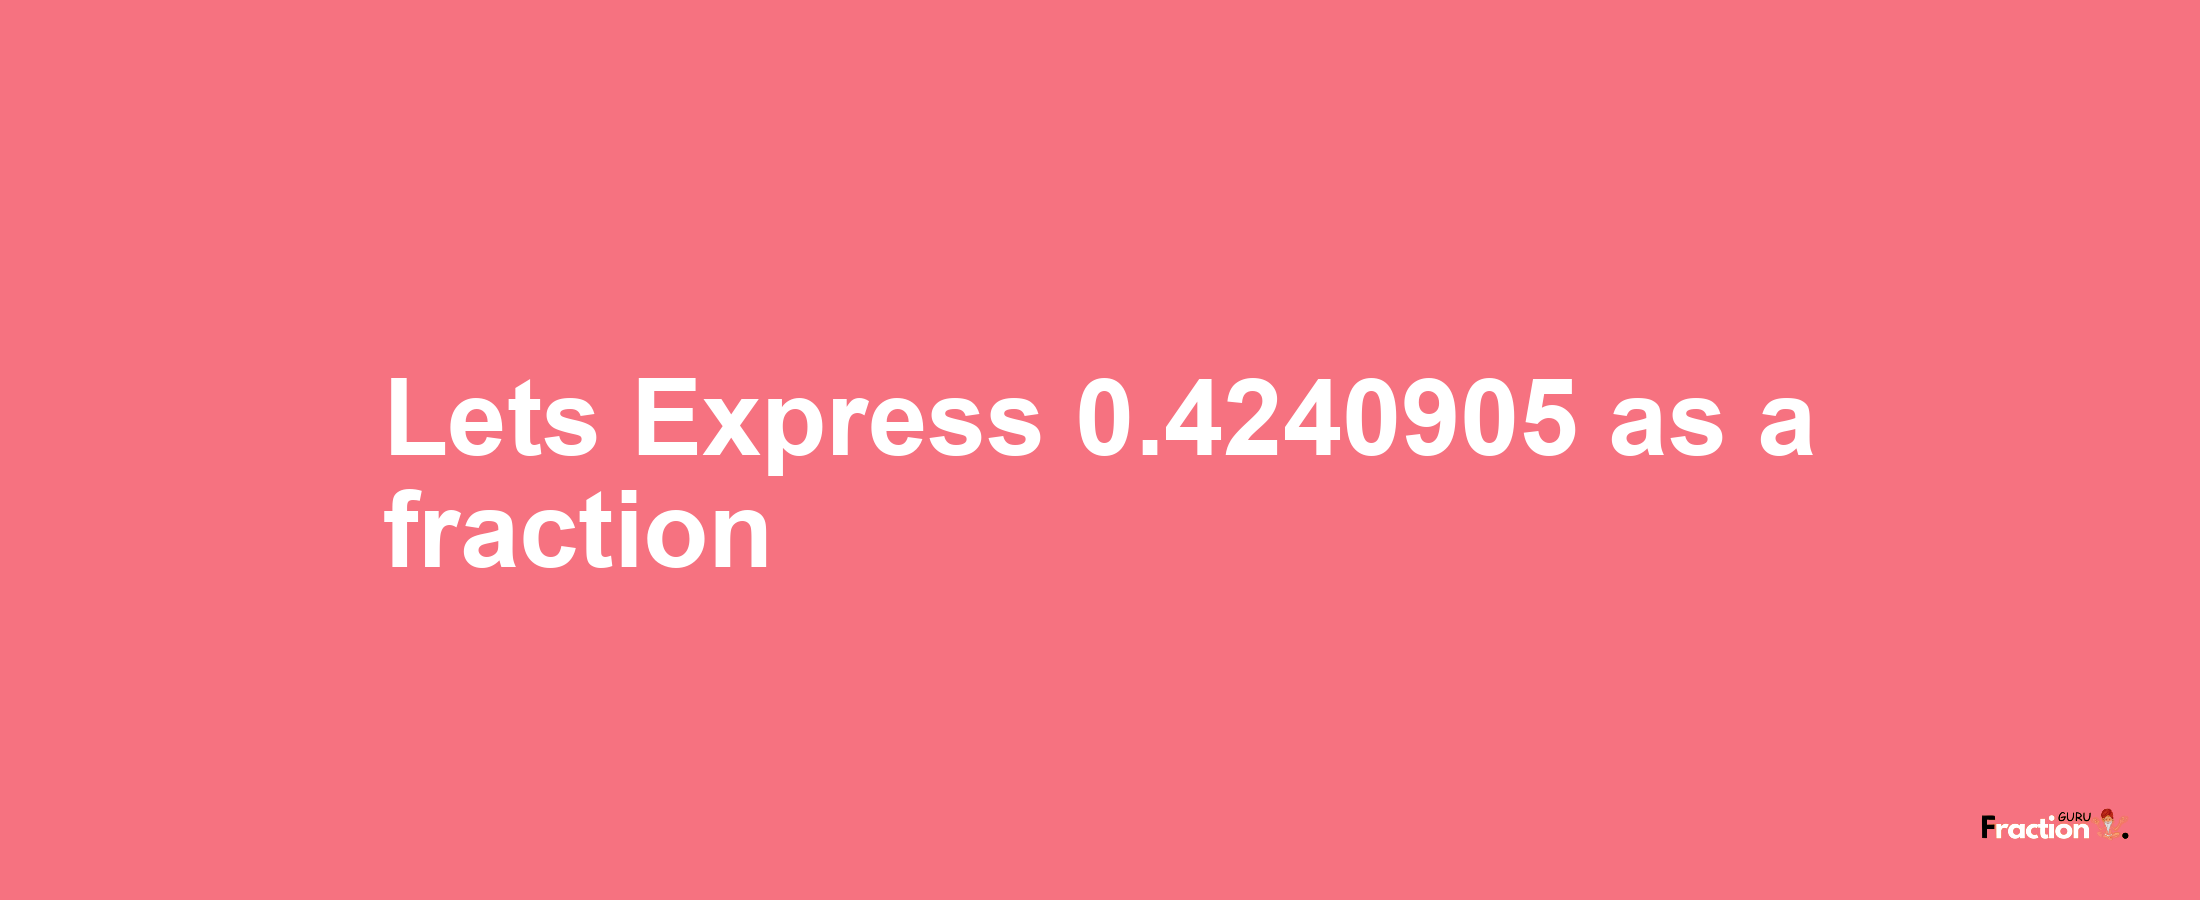 Lets Express 0.4240905 as afraction